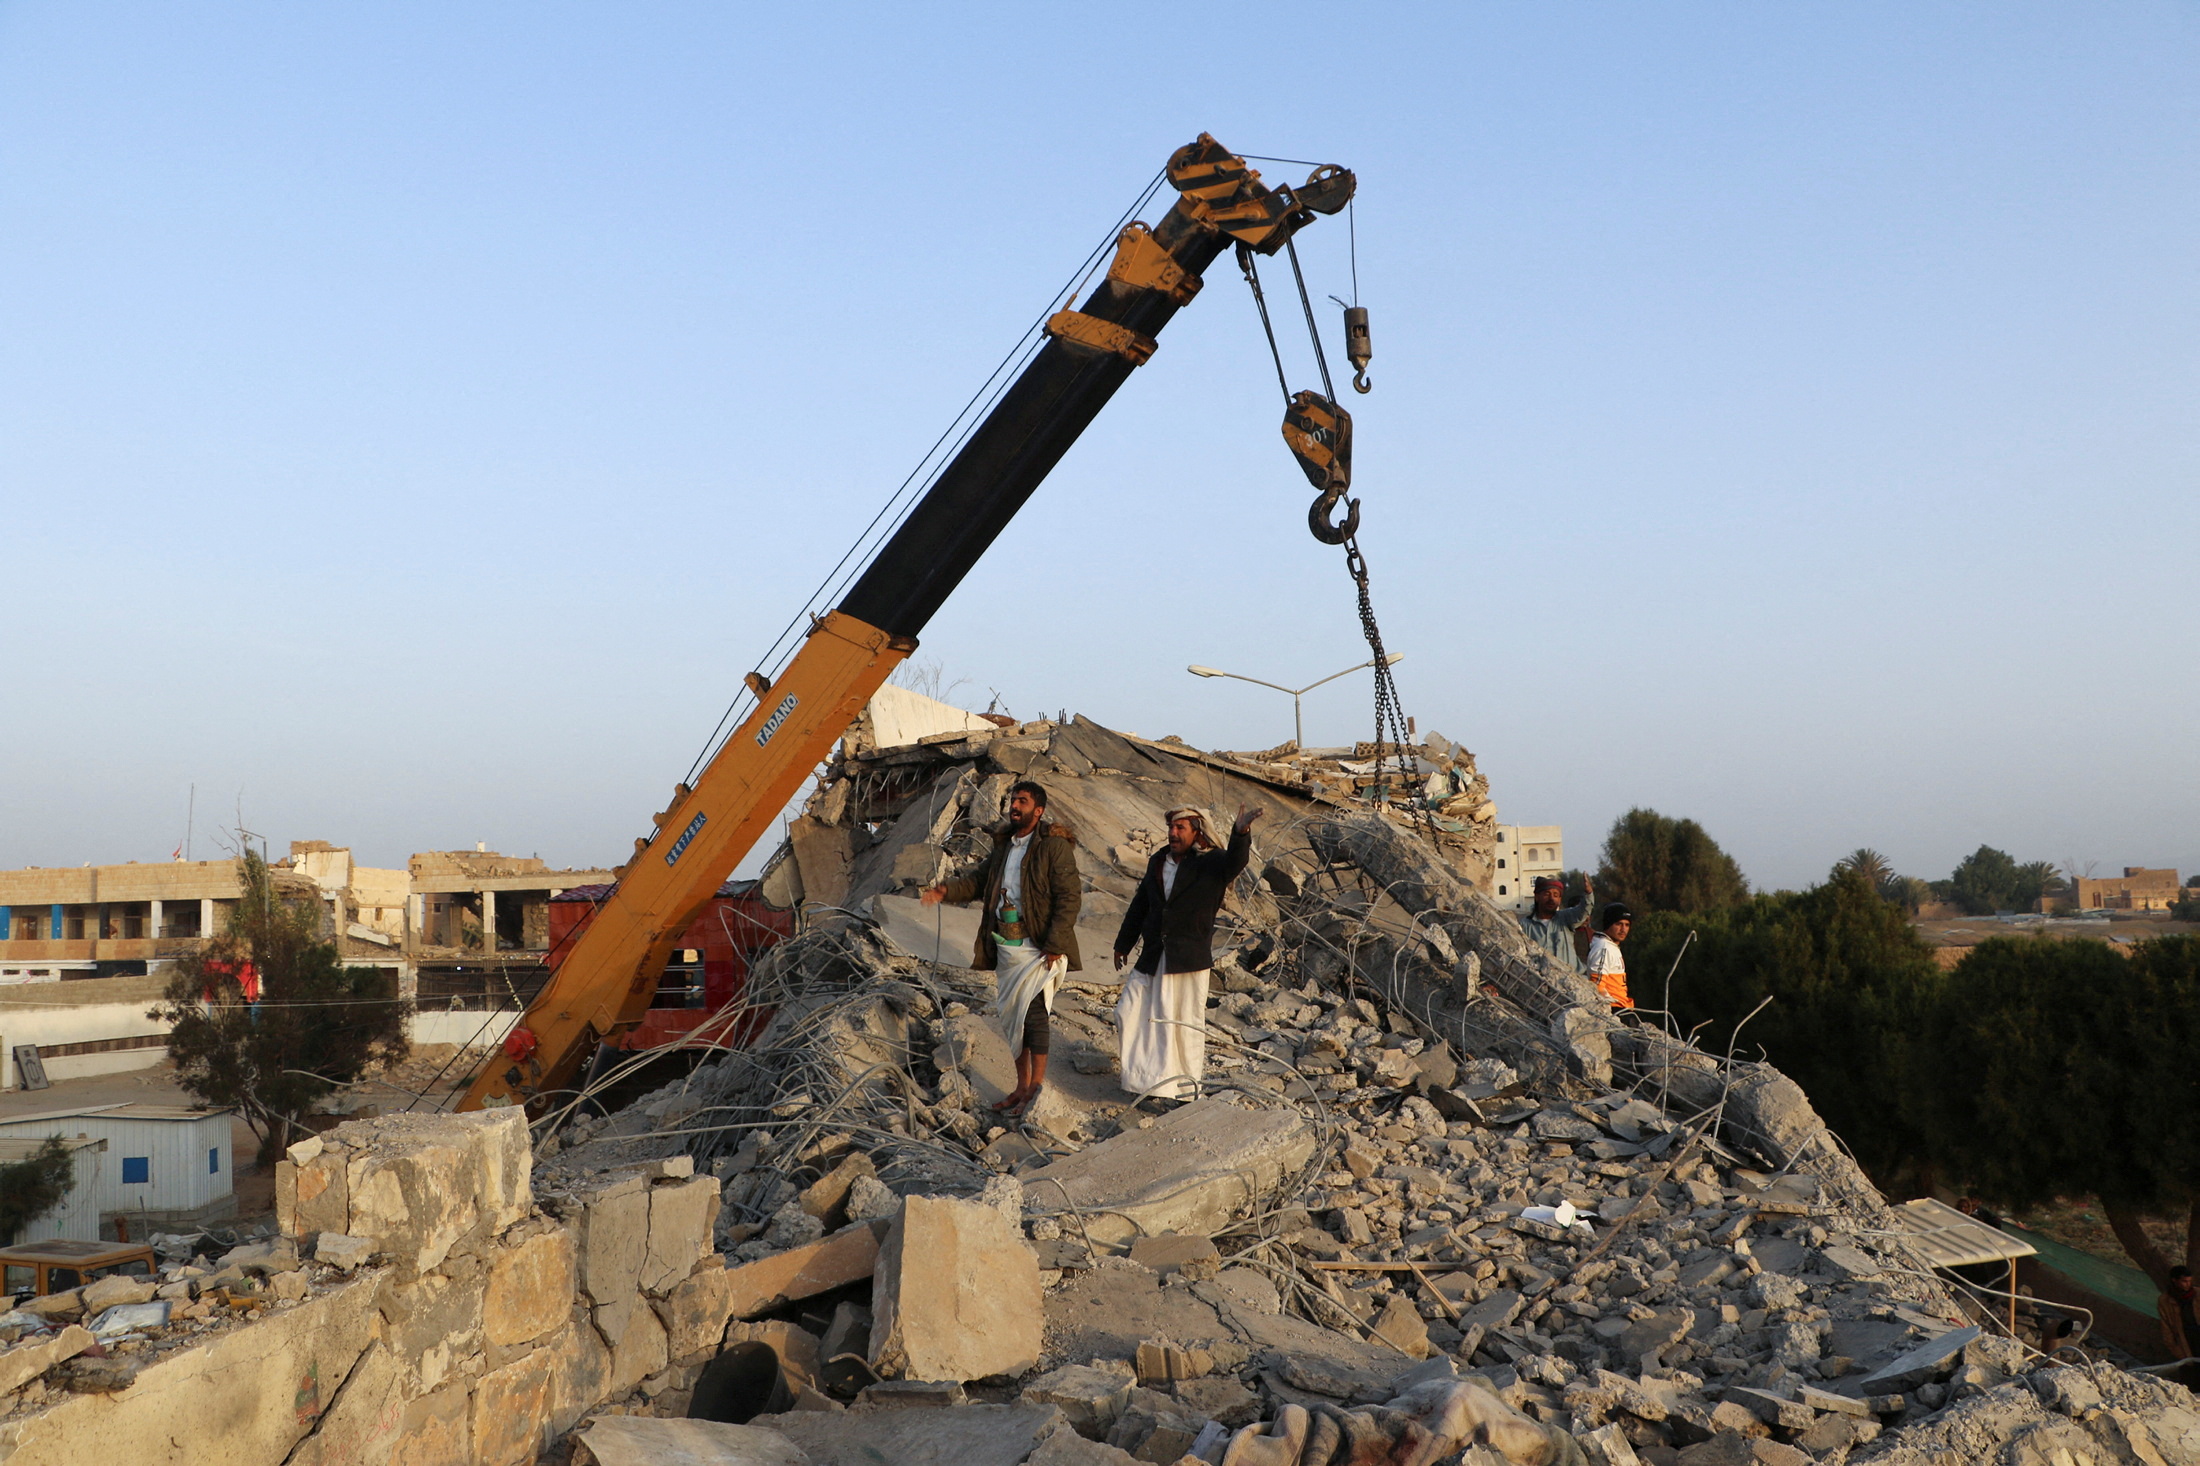 Rescuers use a crane to remove collapsed concrete roof of a detention center hit by air strikes in Saada